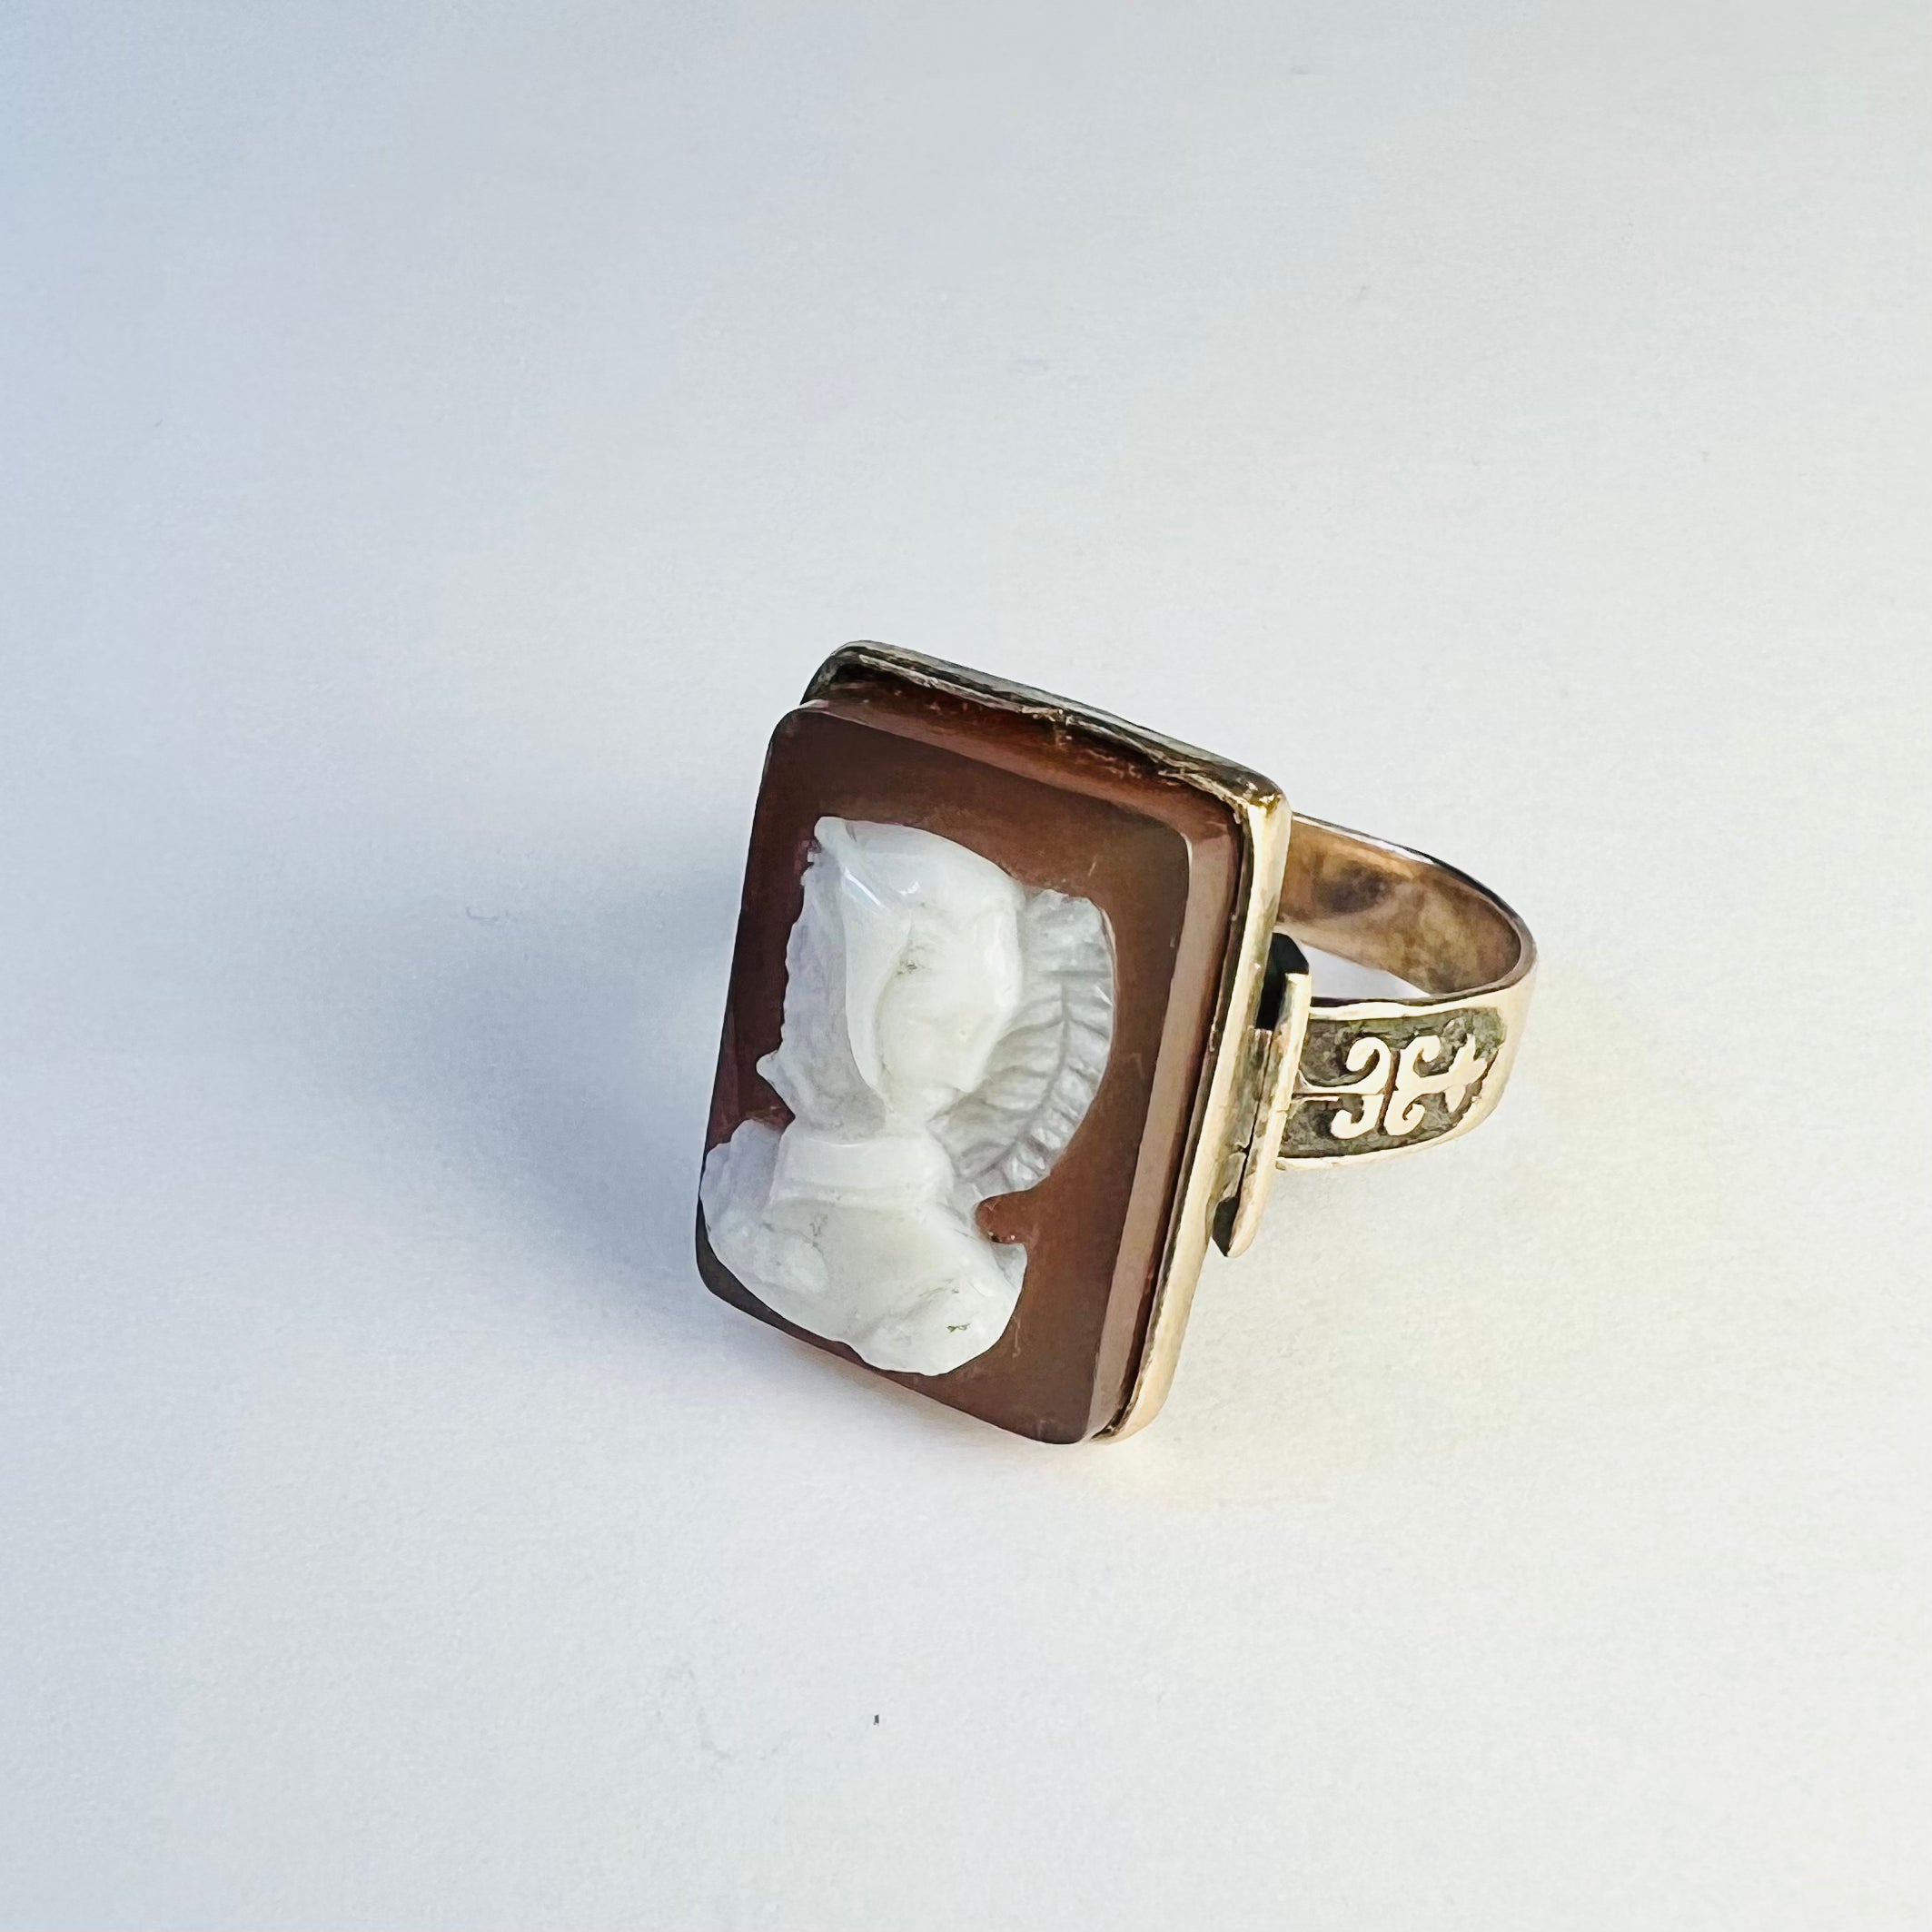 Antique Victorian 10K Rose Gold Heart Stone Cameo Engraved Band Ring Size 6.25